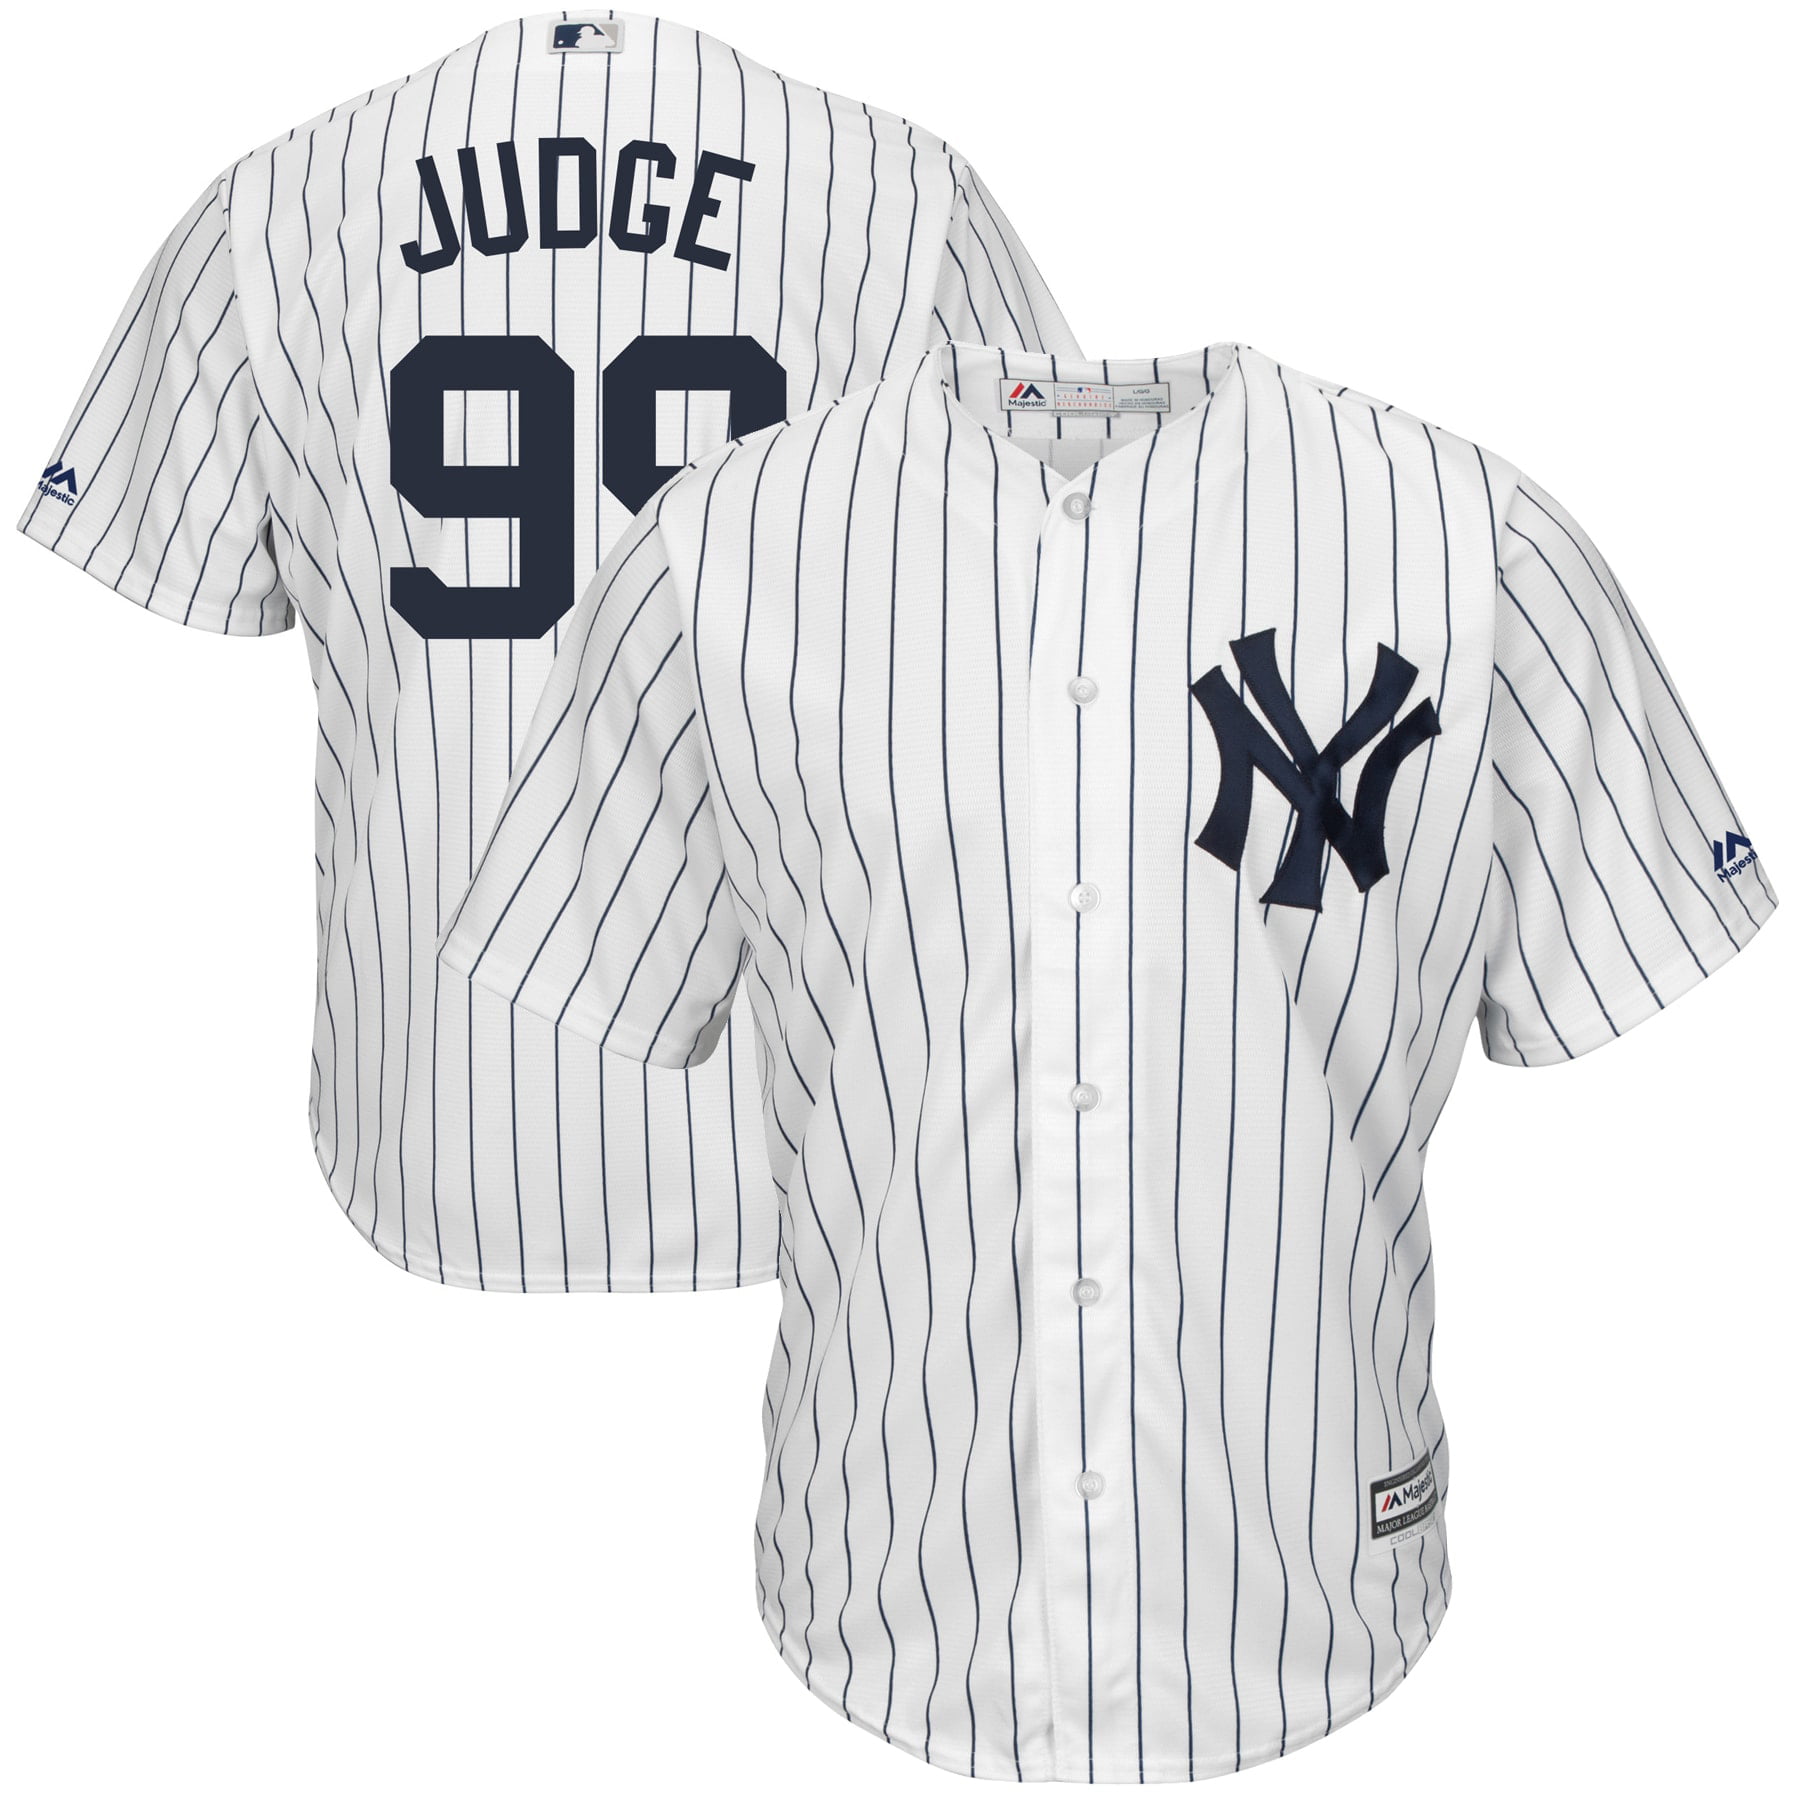 yankee jersey outfit